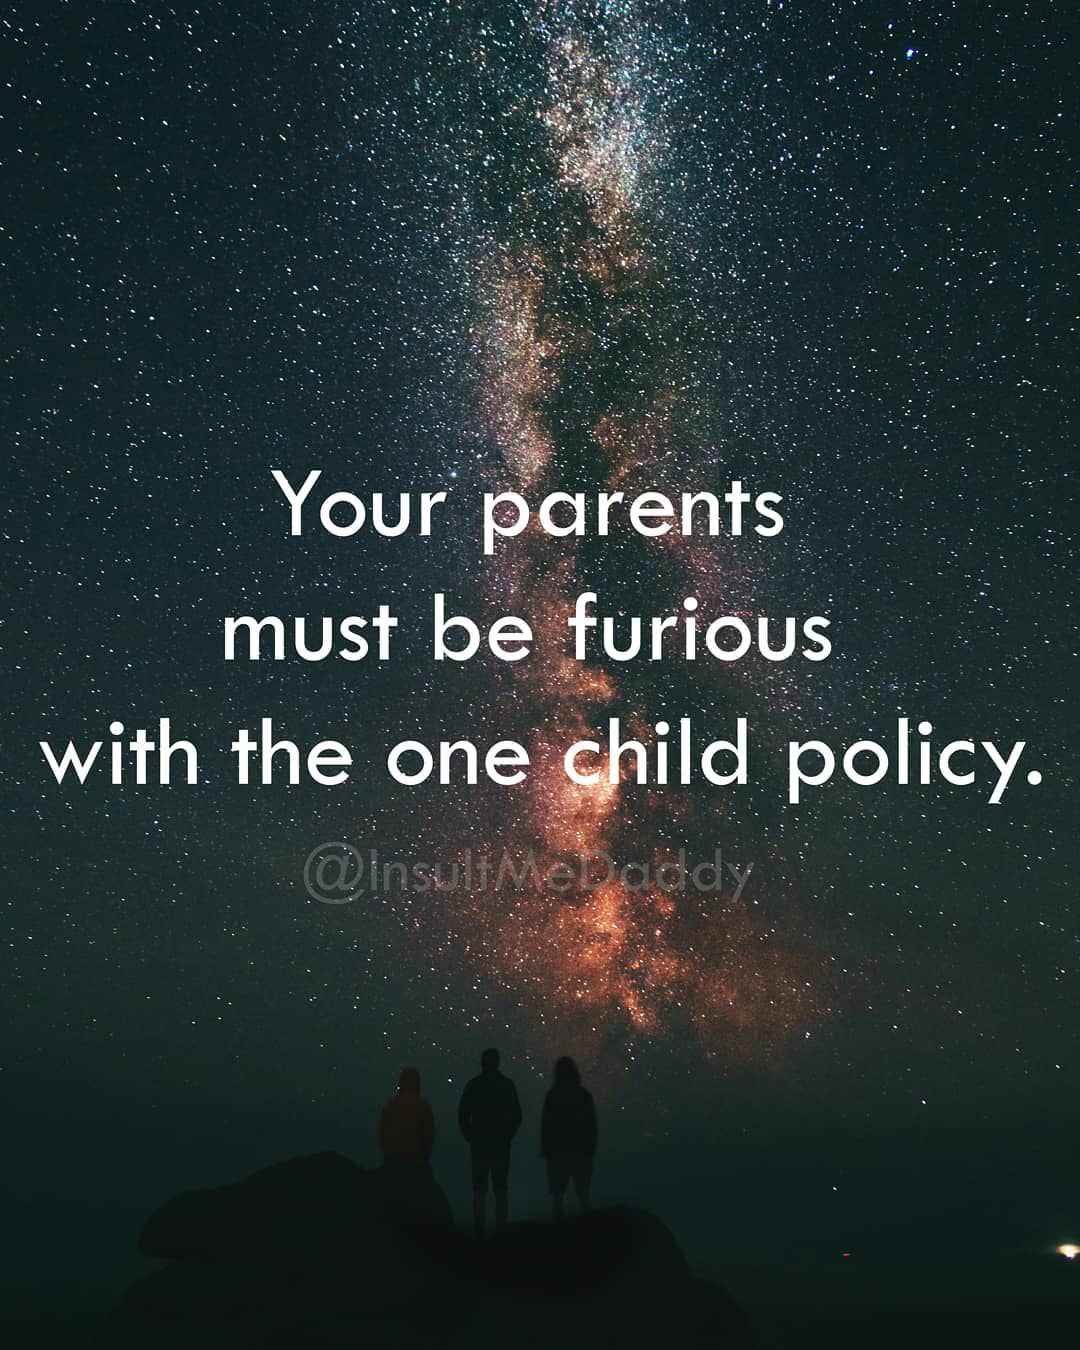 secret life of bees quotes - Your parents must be furious with the one child policy. Mennedy